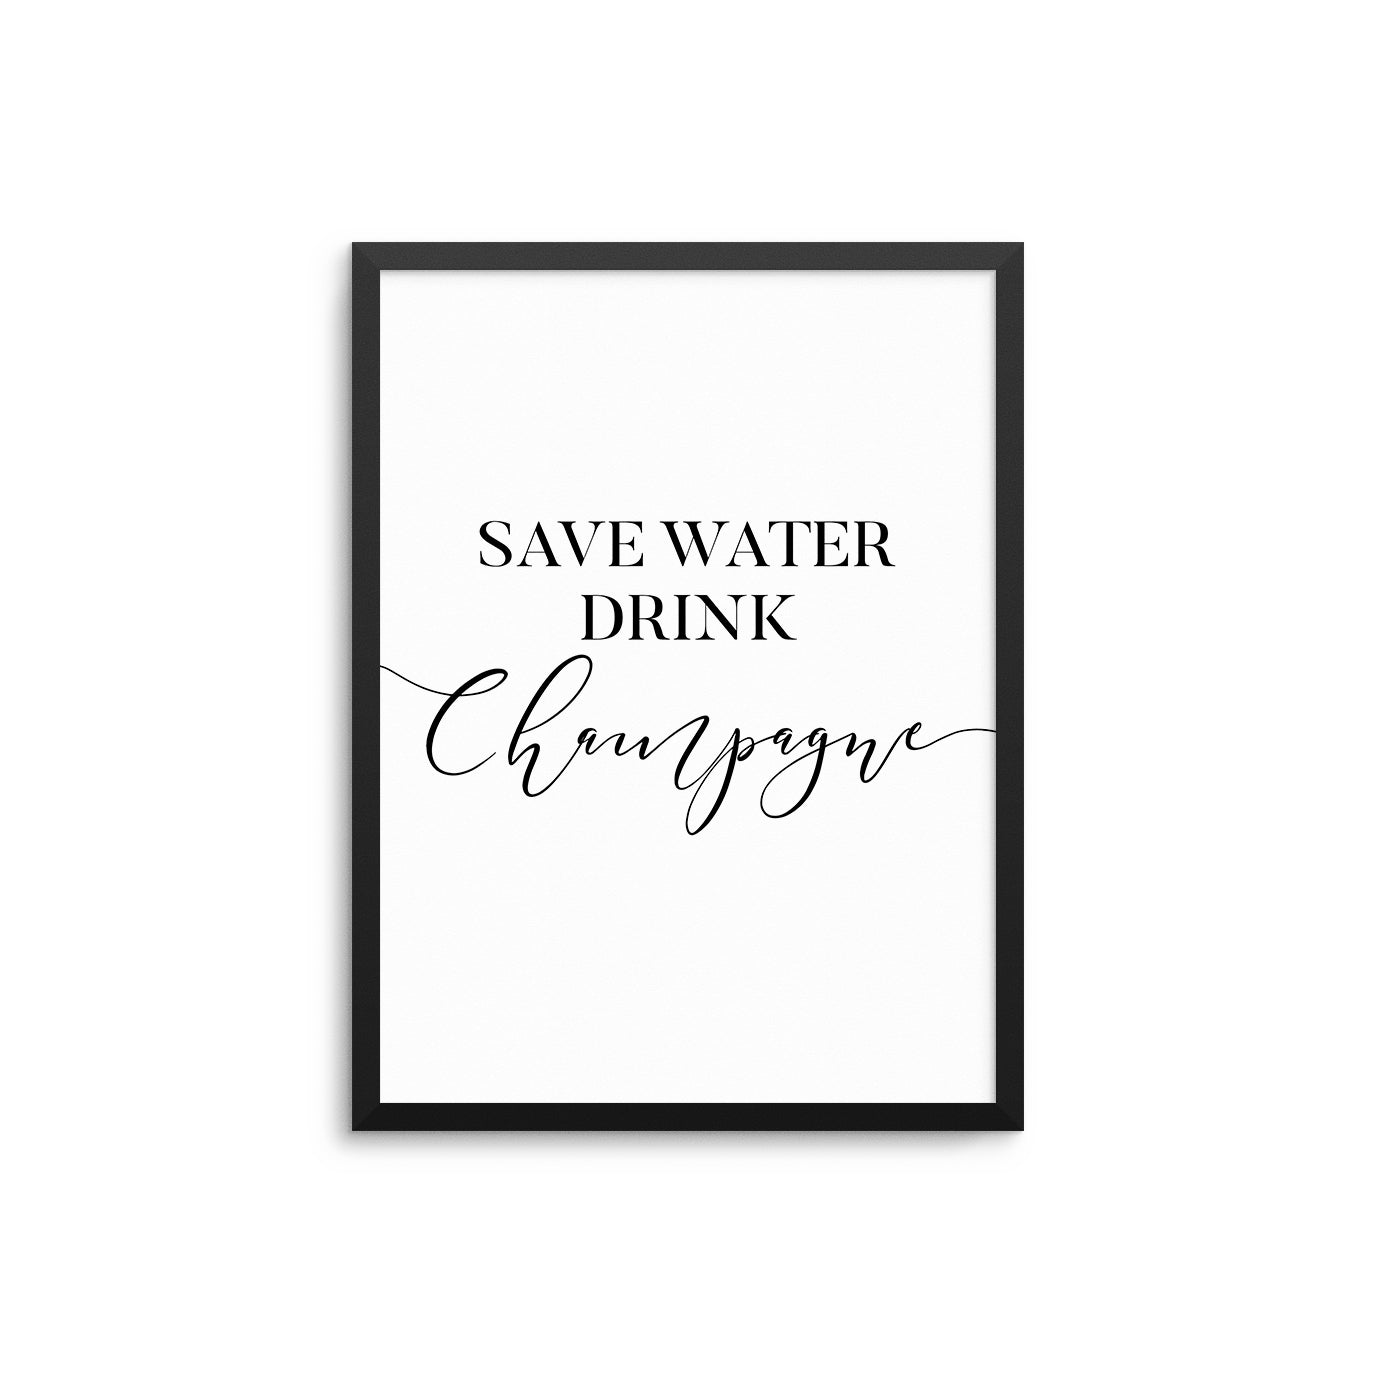 Save Water Drink Champagne - D'Luxe Prints